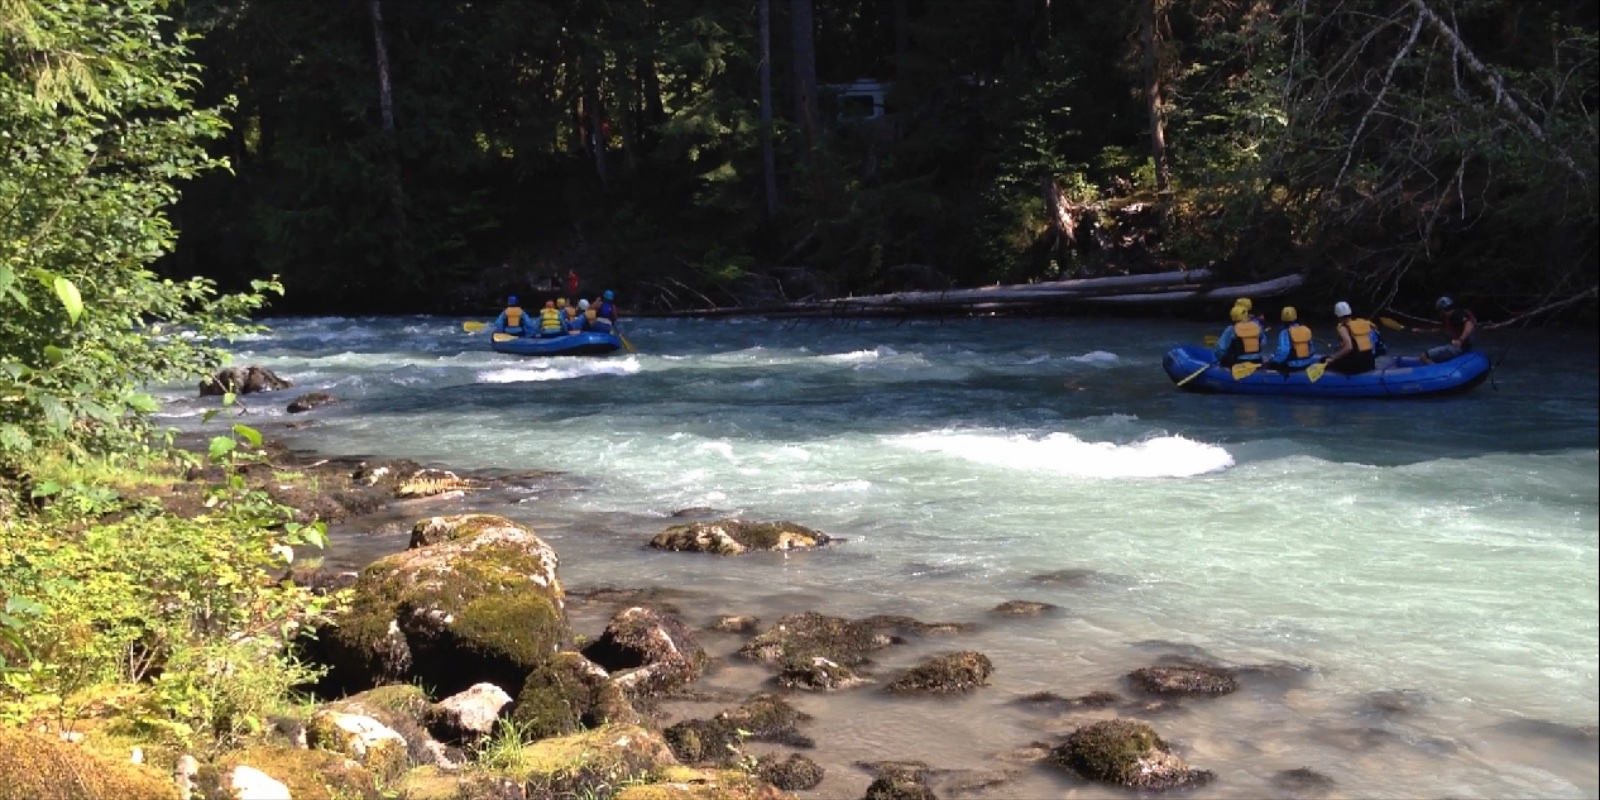 Nooksack rafting trips go right by Snowater